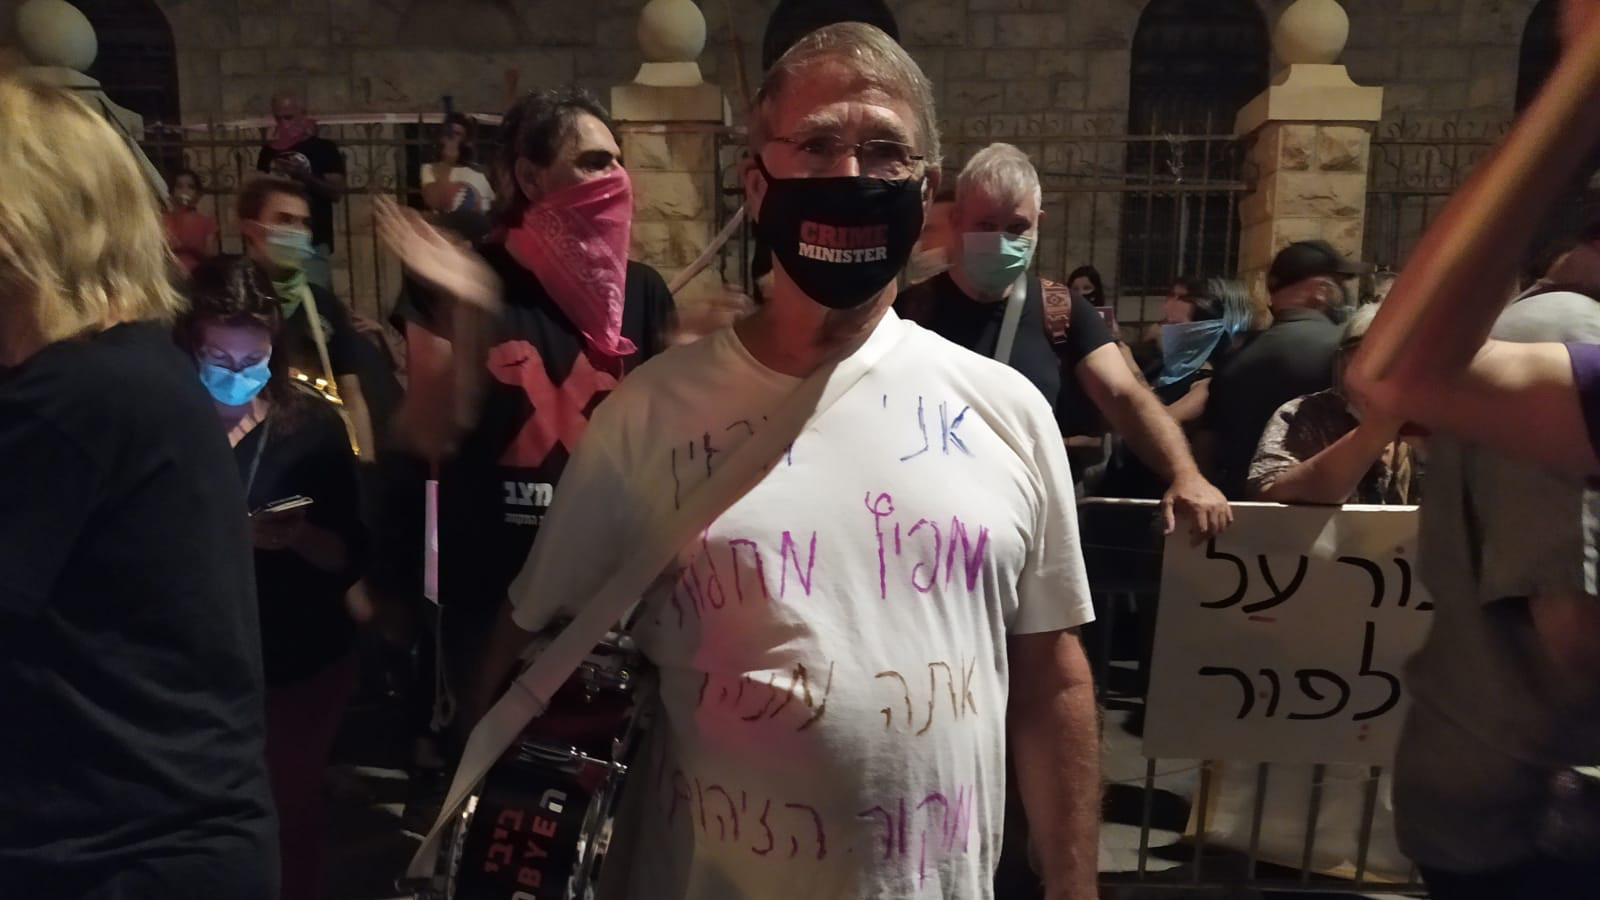 Oded, 71, from Tel Aviv-Yafo, came because his pain was political. (Photo: Yahel Faraj)